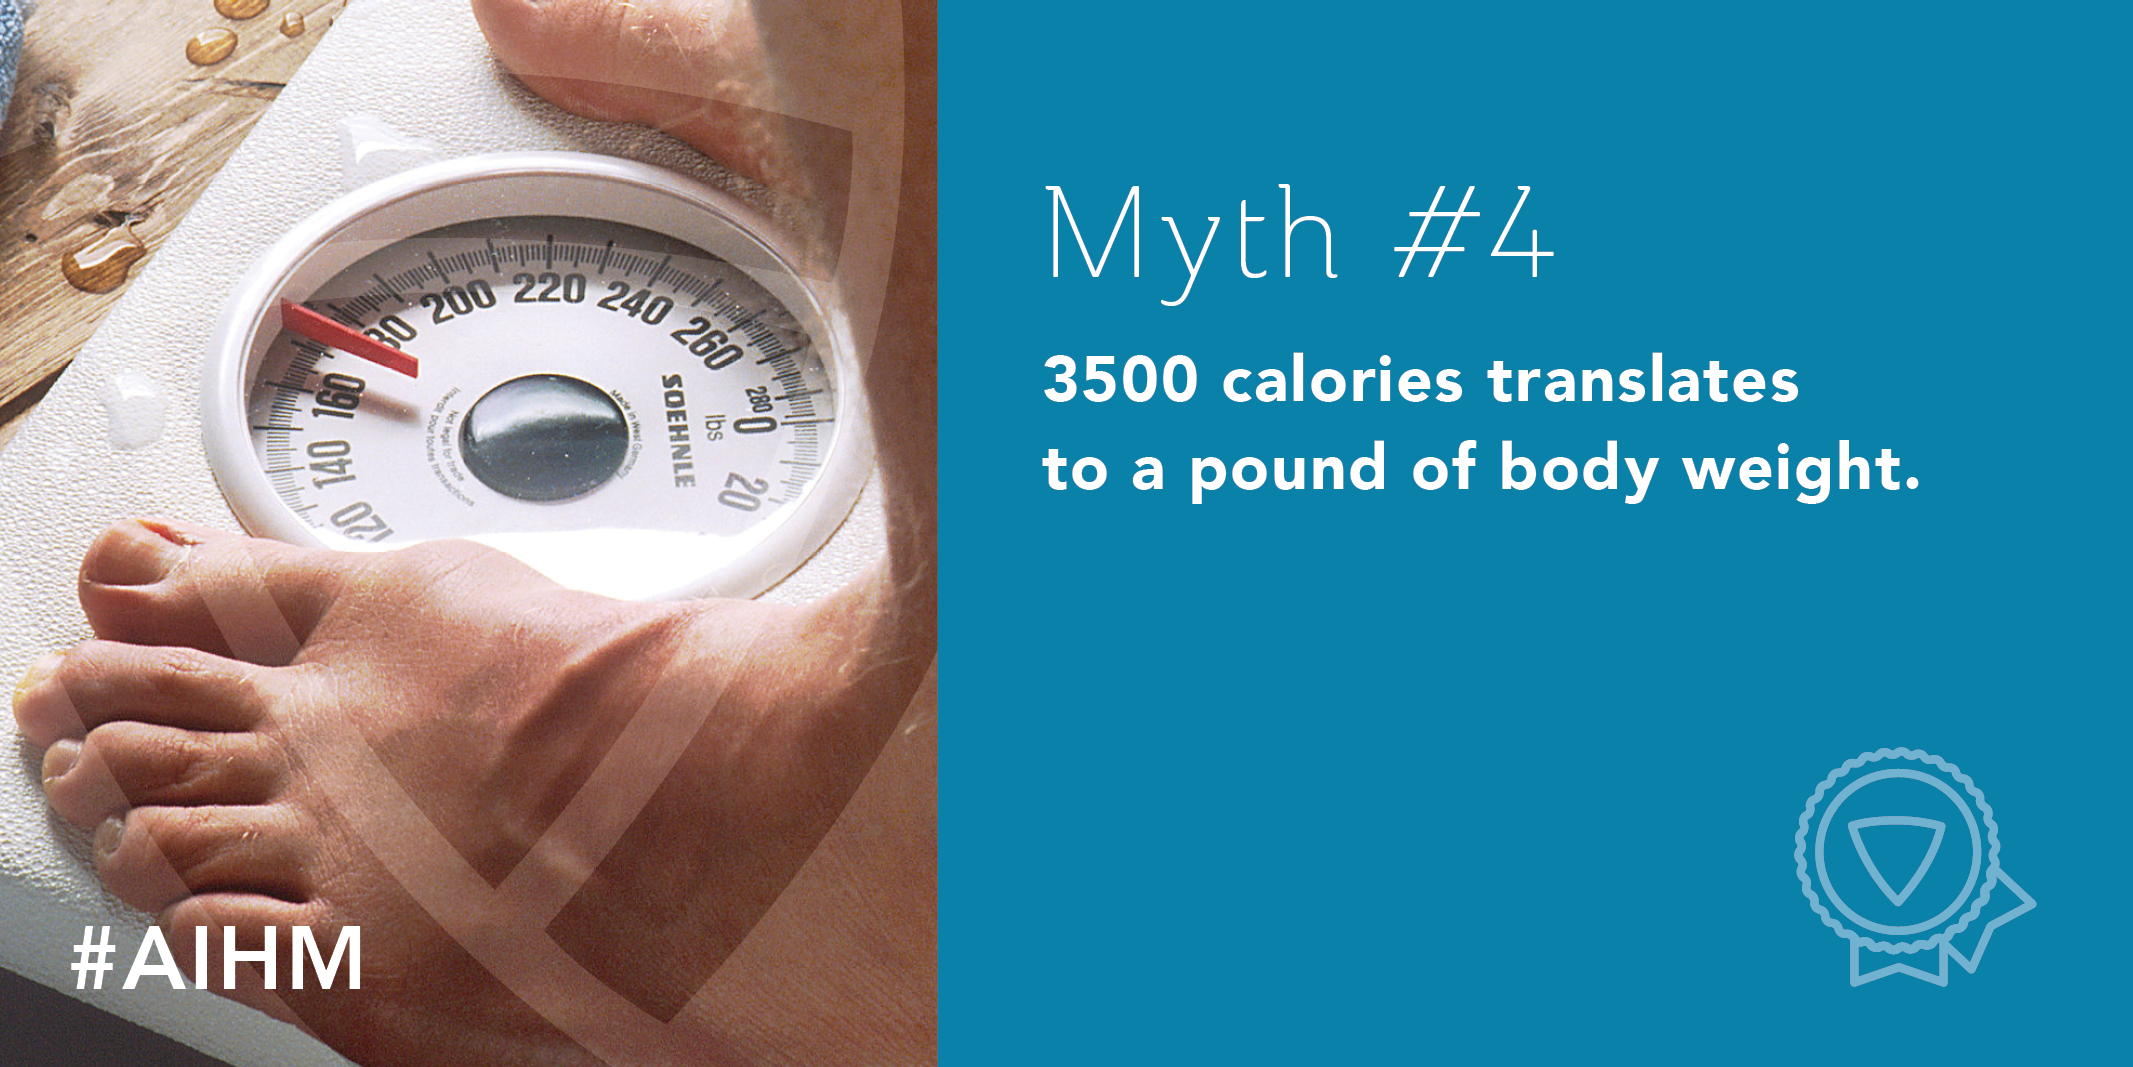 Myth #4: 3500 calories translates to a pound of body weight.